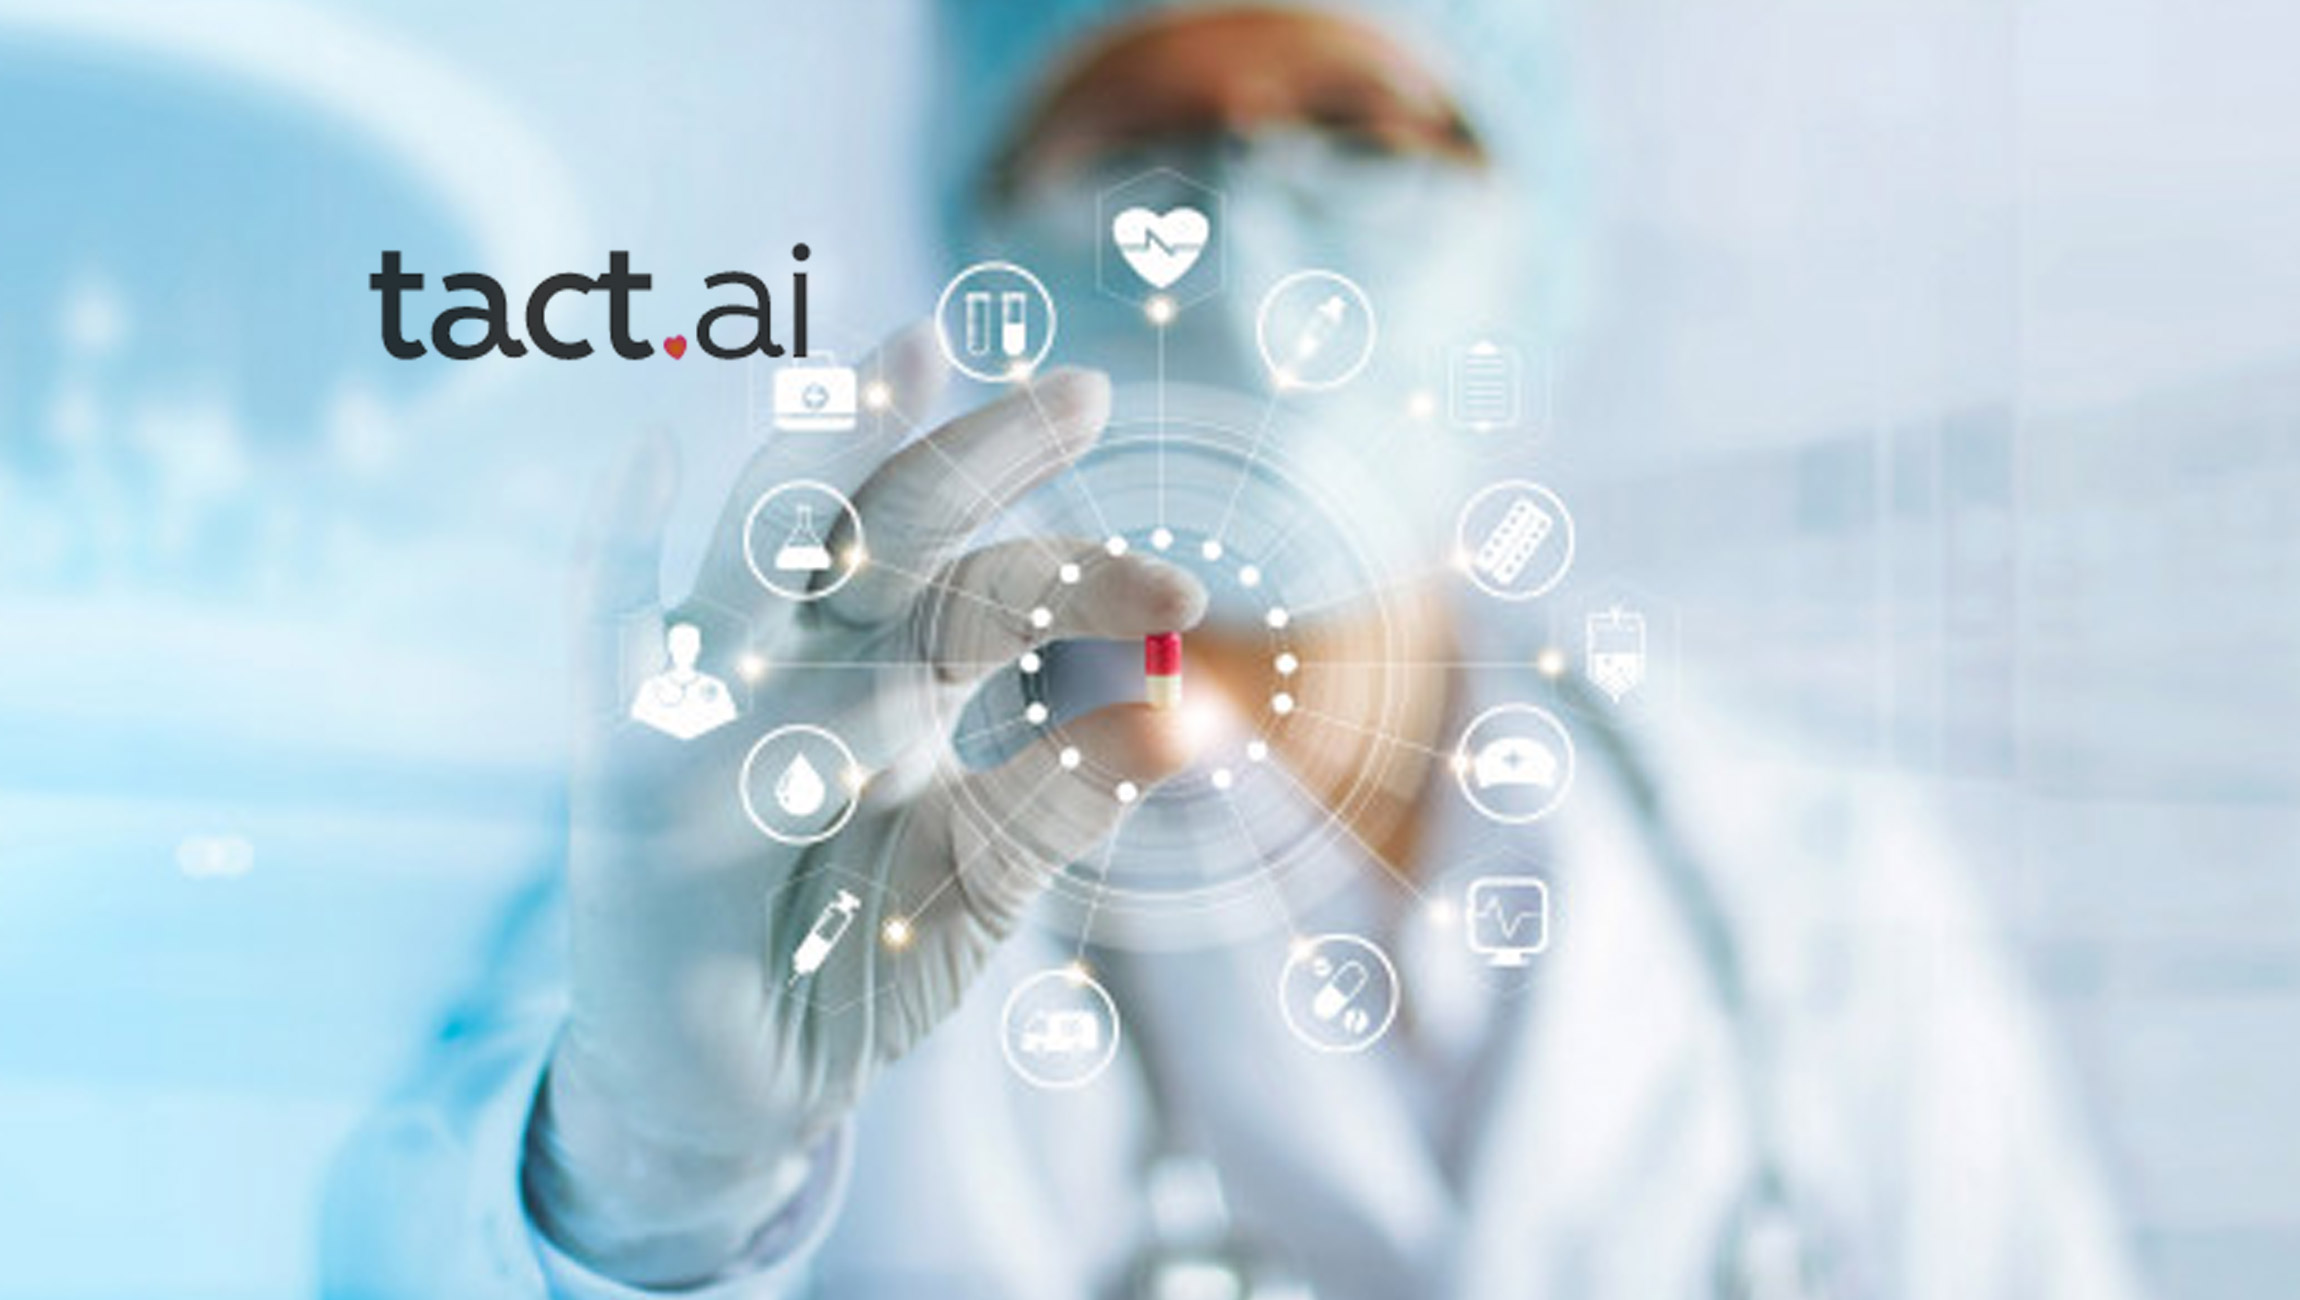 Tact.ai Adds Industry Veteran David Logue To Lead Pharmaceuticals And Life Sciences Strategy